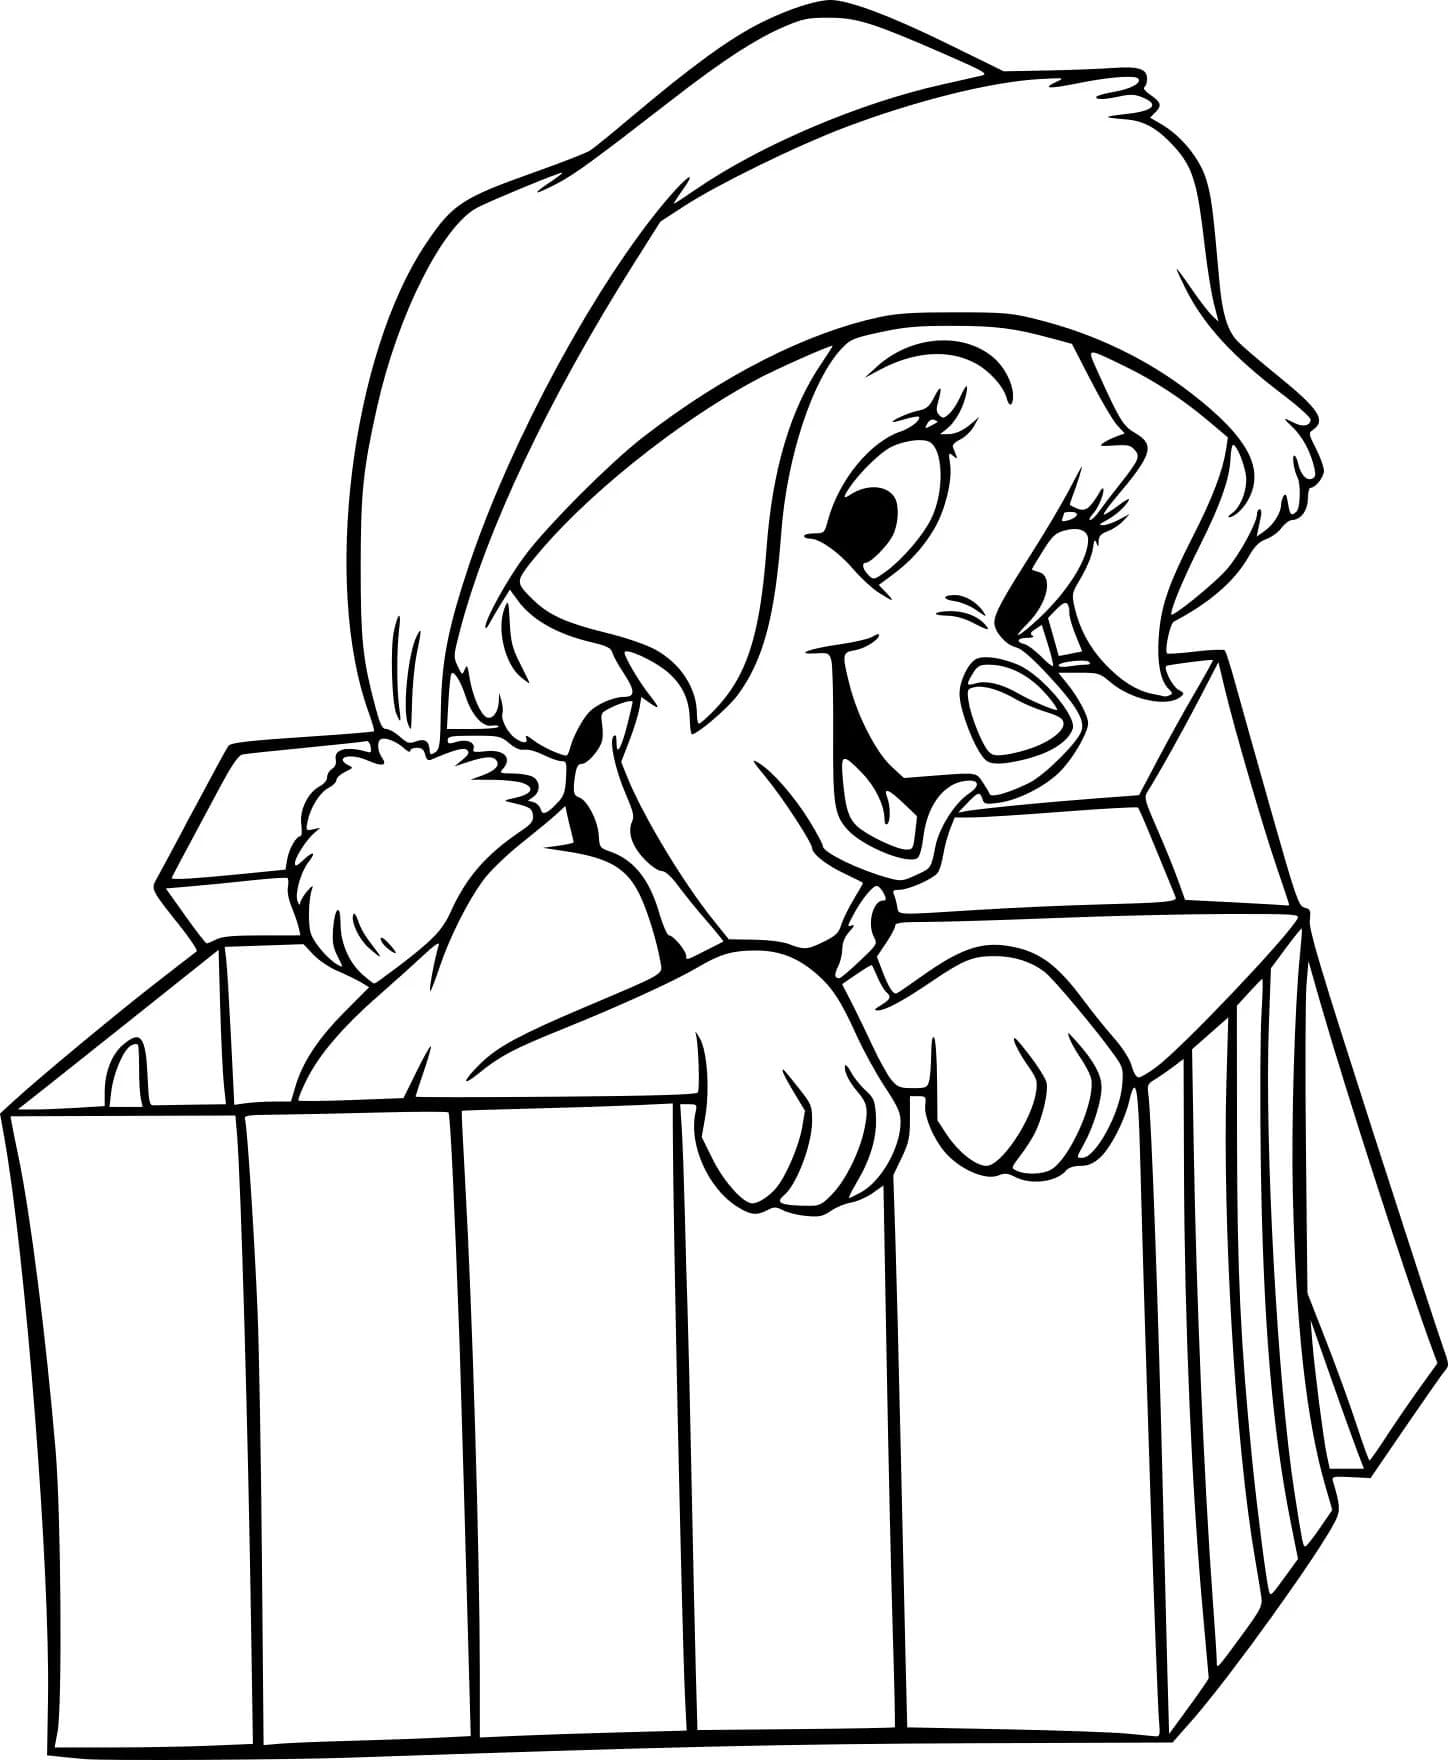 Christmas Puppy Coloring Pages | 60 images Free Printable